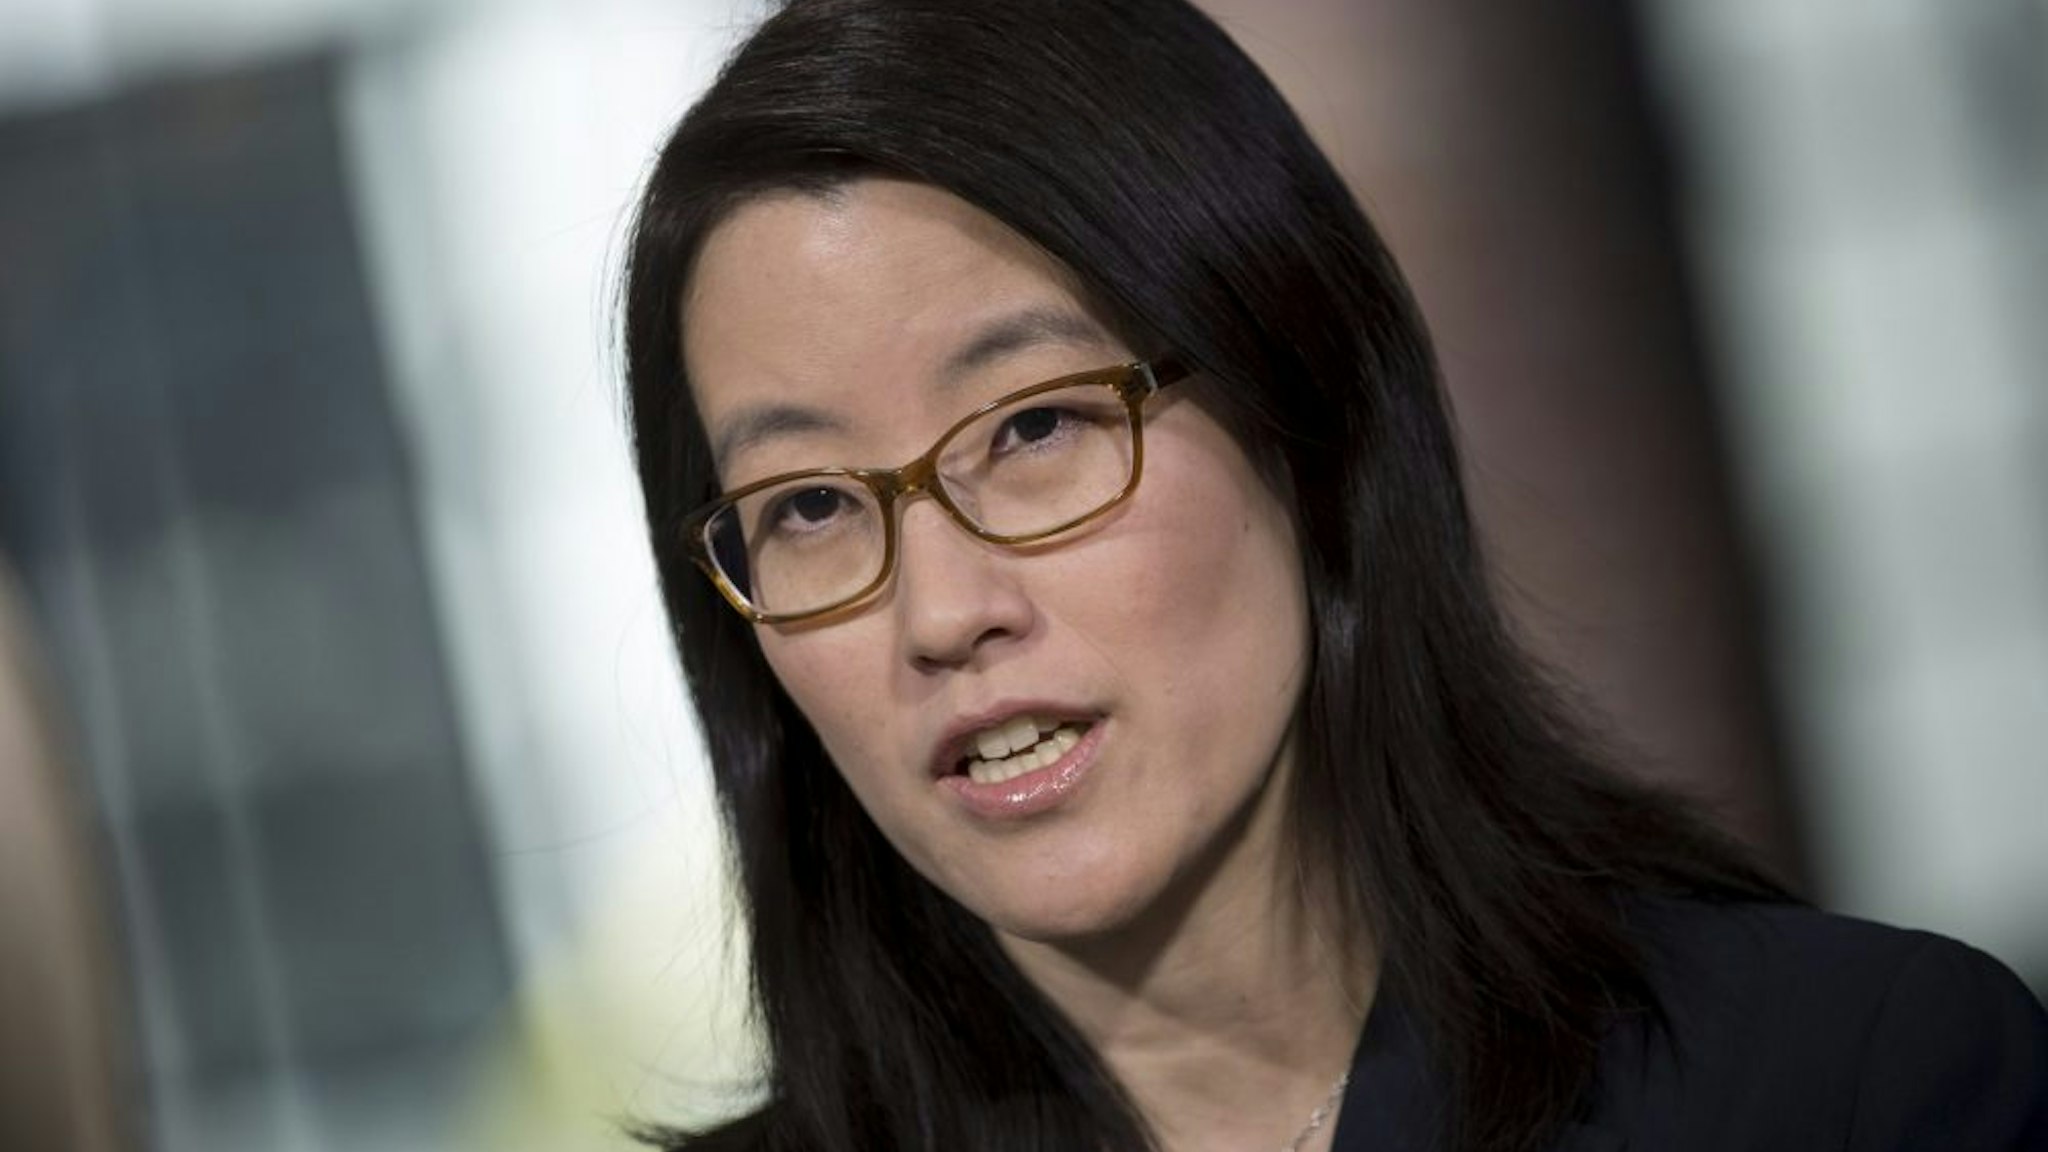 Ellen Pao, partner at Kapor Capital and former venture capitalist at Keiner Perkins Caufield, speaks during a Bloomberg Technology interview in San Francisco, California, U.S., on Thursday, April 20, 2017. Professor Anita Hill and Pao discussed harassment in the workplace, as well as diversity and gender equality.